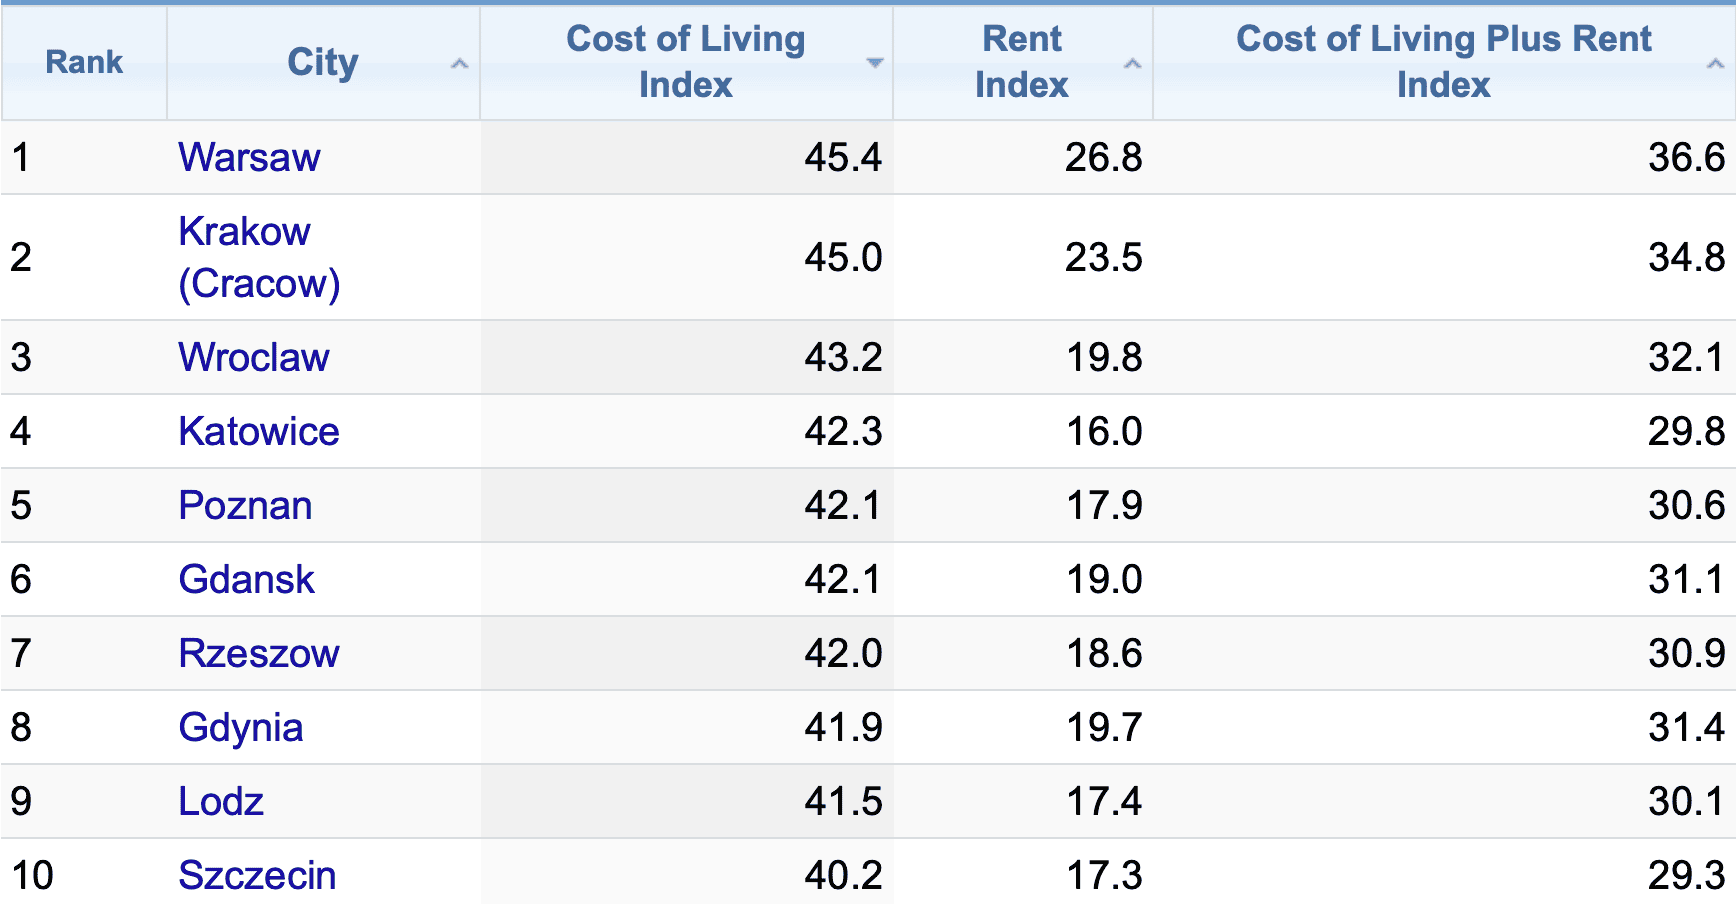 Cost of living in Polish citiies